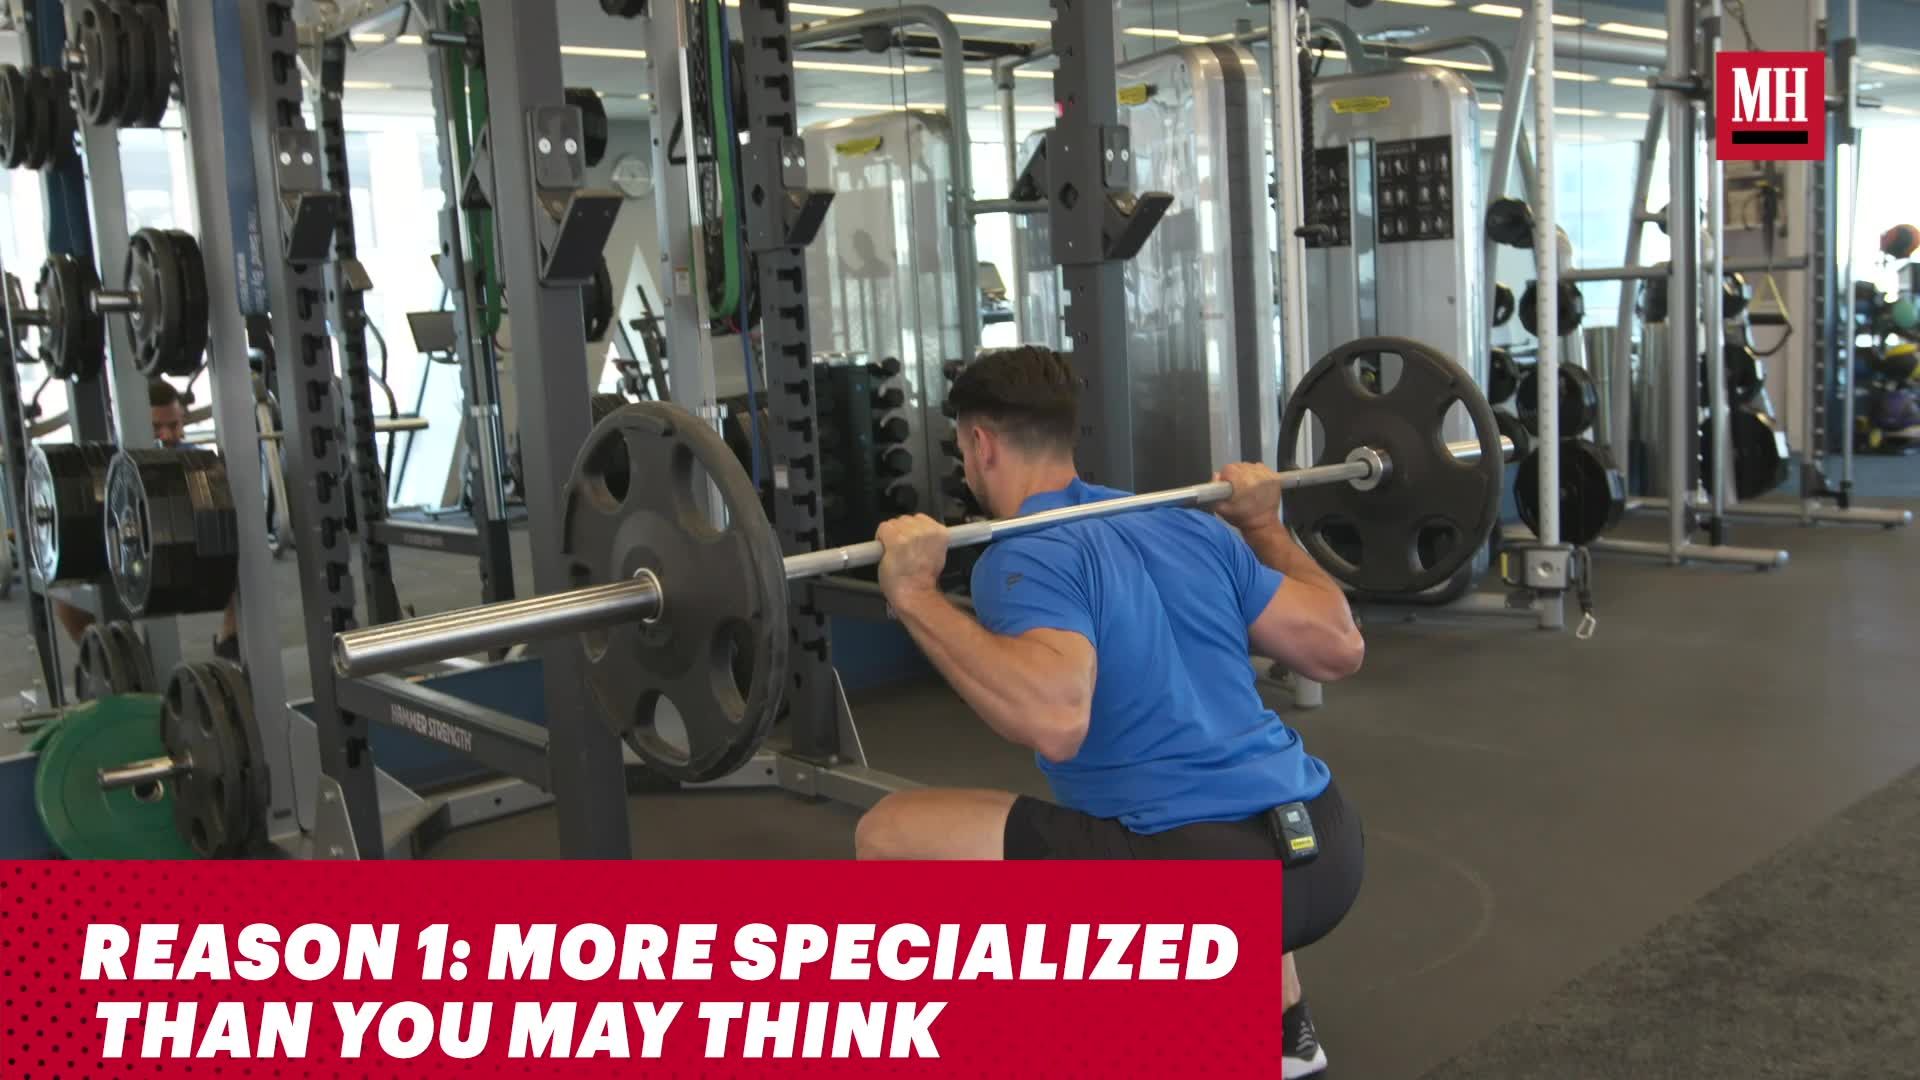 Alternative Lower Back Squat Exercises to Try: Give the Low Back a Break